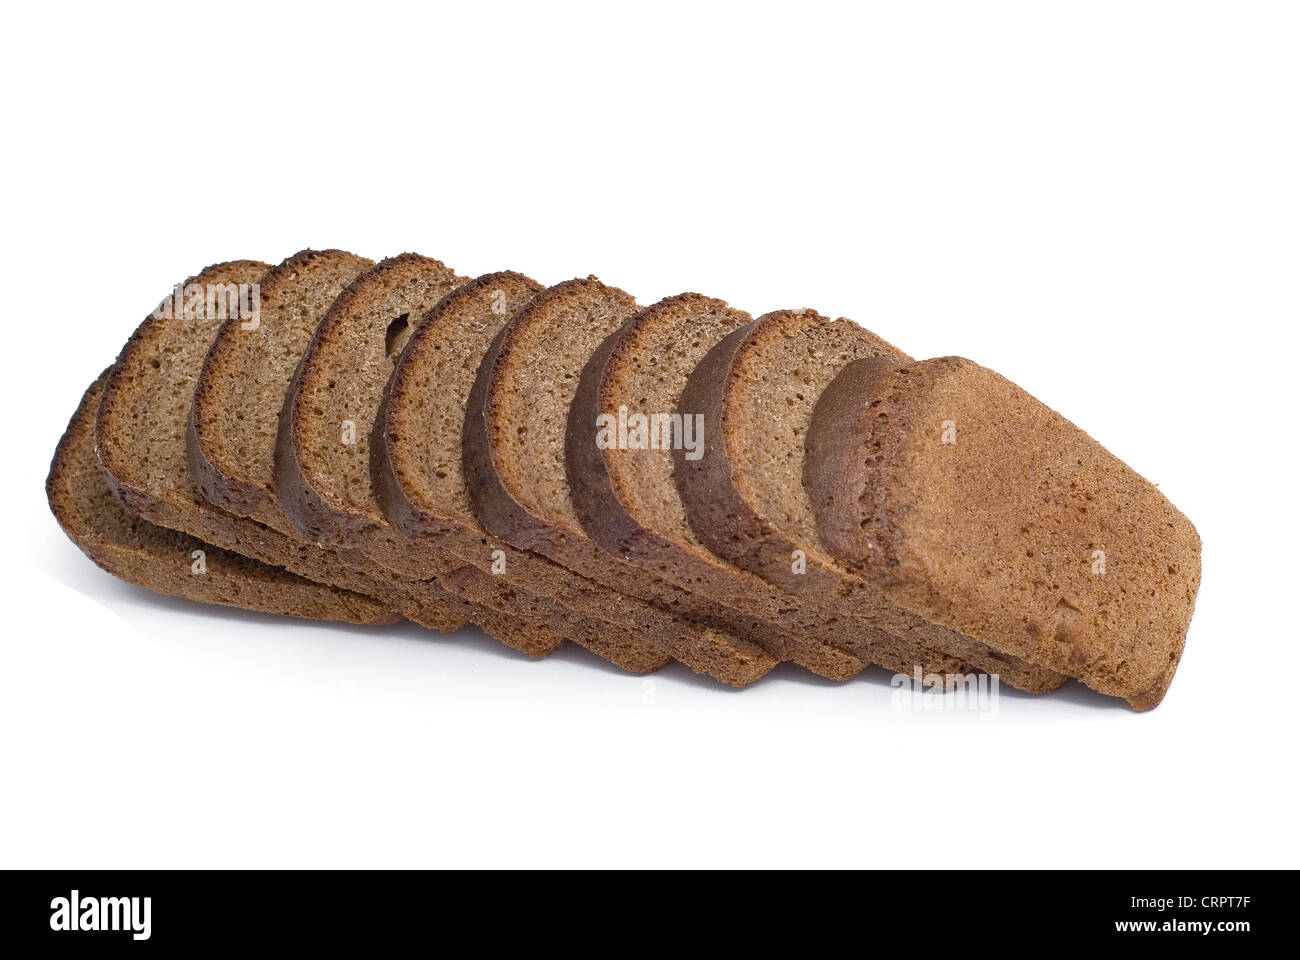 Bread from rye flour isolated on a white background Stock Photo